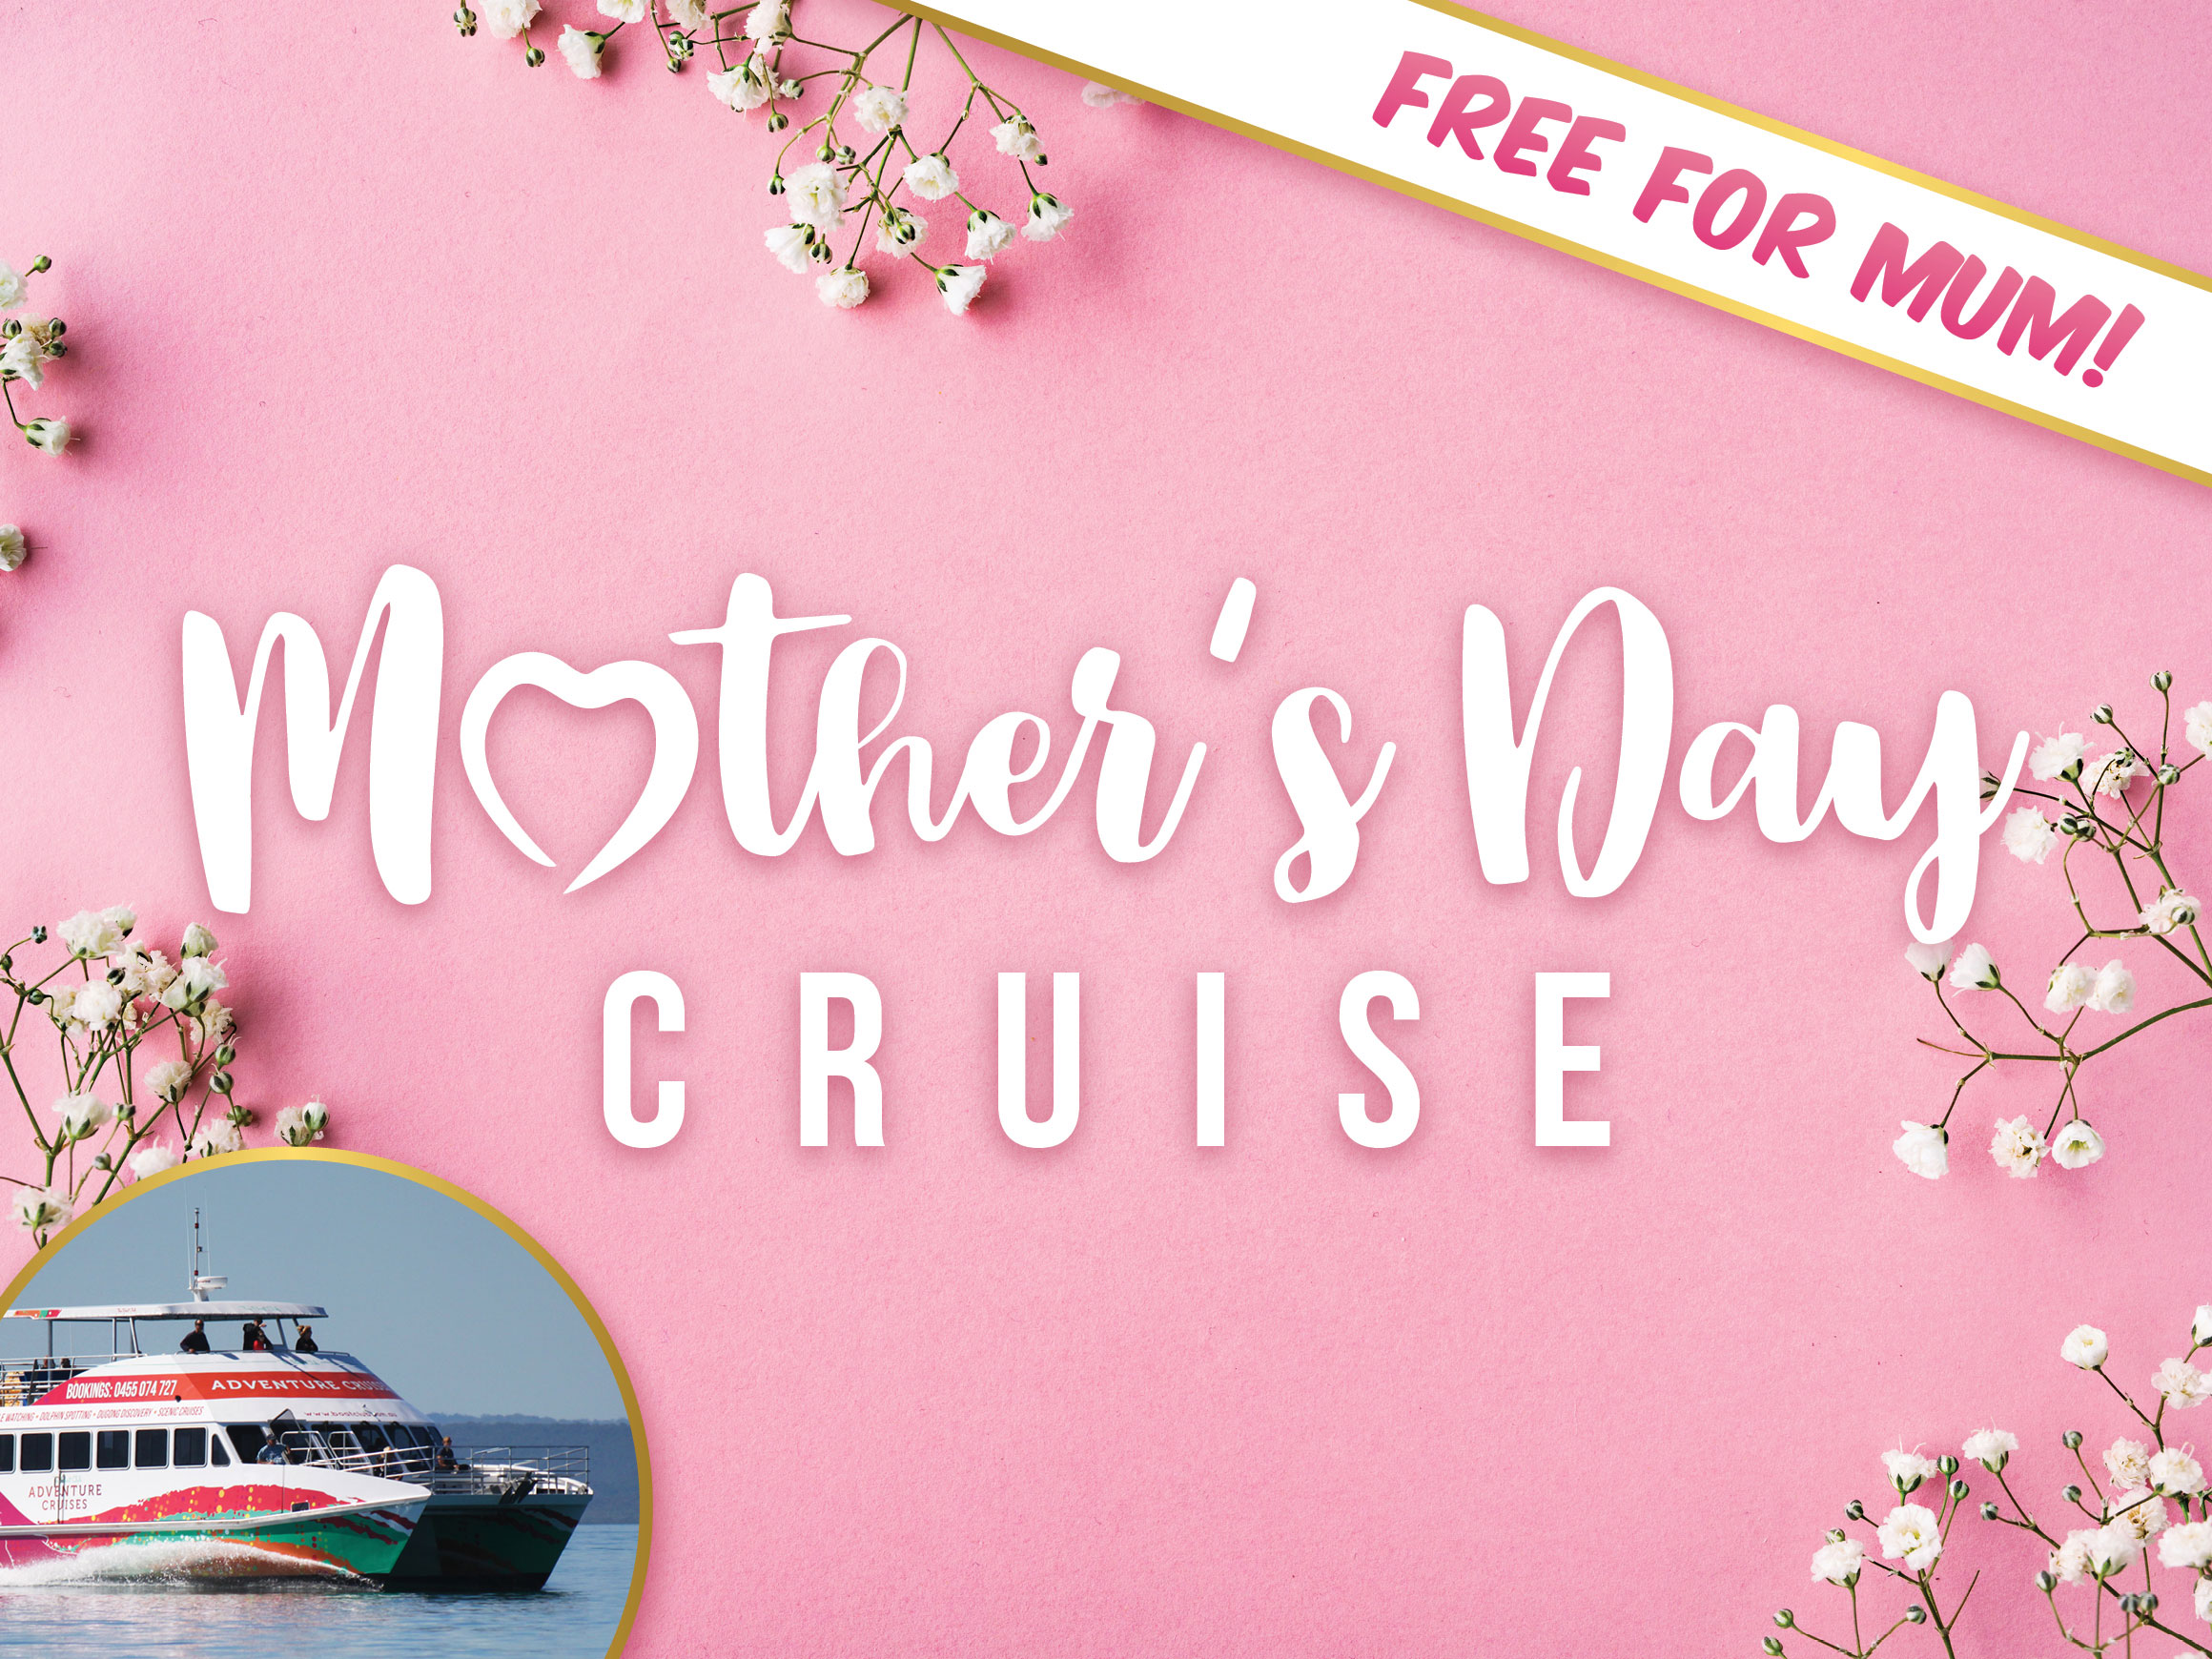 Mothers Day Scenic Cruise Boat Club Reservations